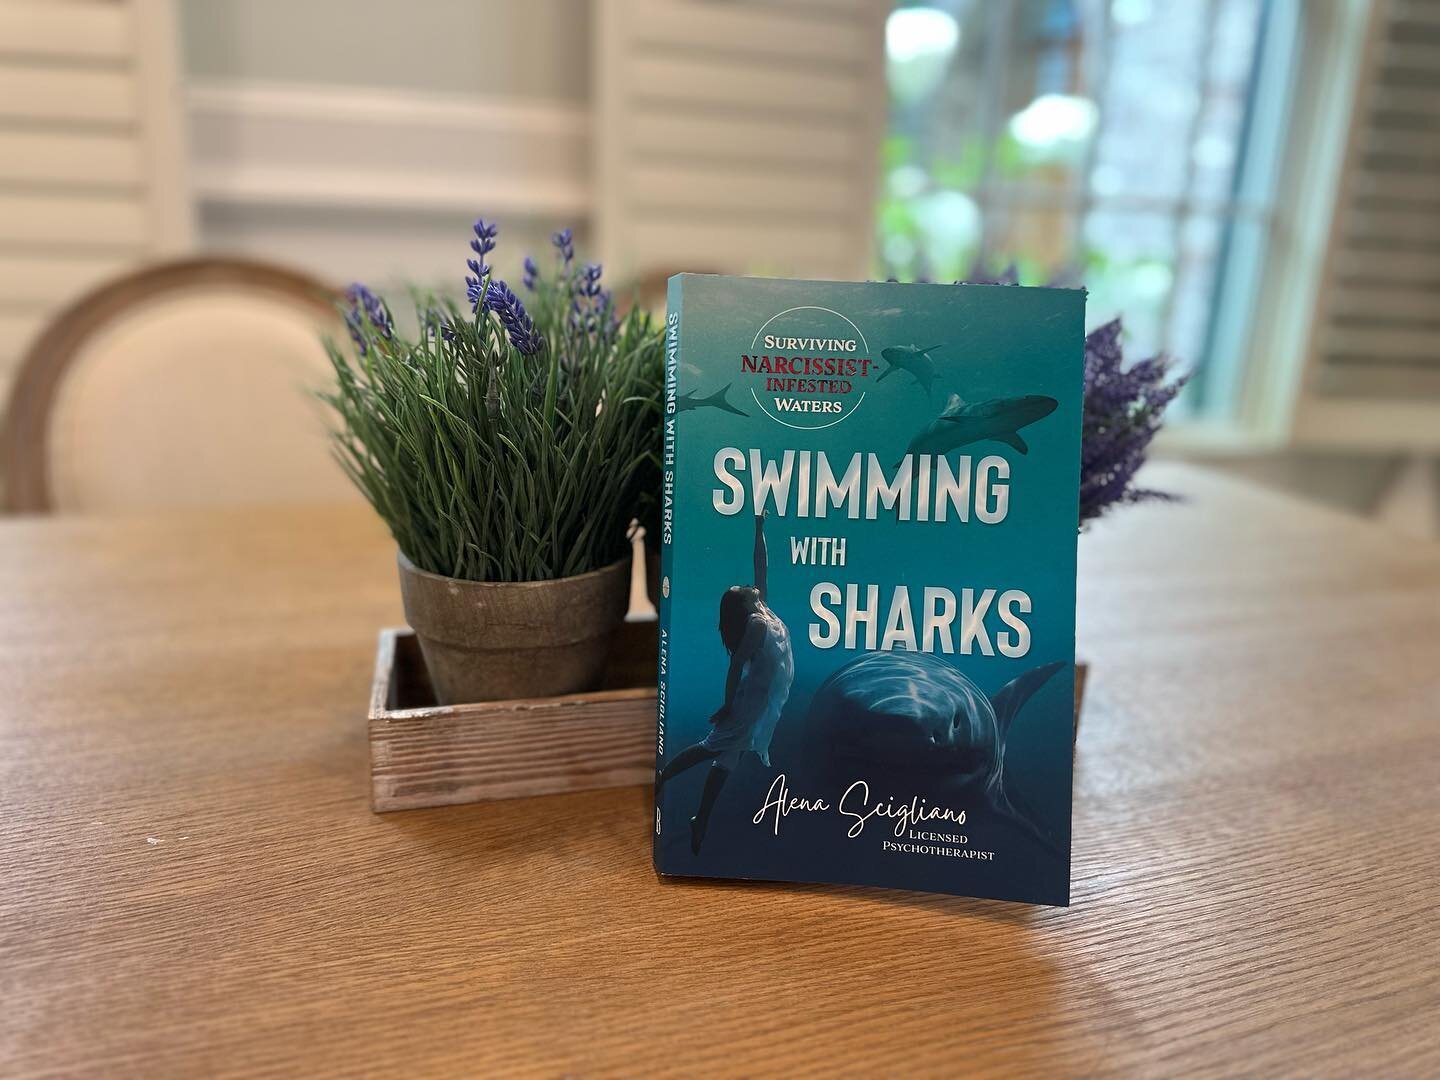 Can&rsquo;t wait to share this with you all next month!
Get updates by going to my website or the link in my bio!
#swimmingwithsharksbook #swimmingwithsharks🦈 #narcissisticabusebook #narcissisticabuse #narcissist #narcissism